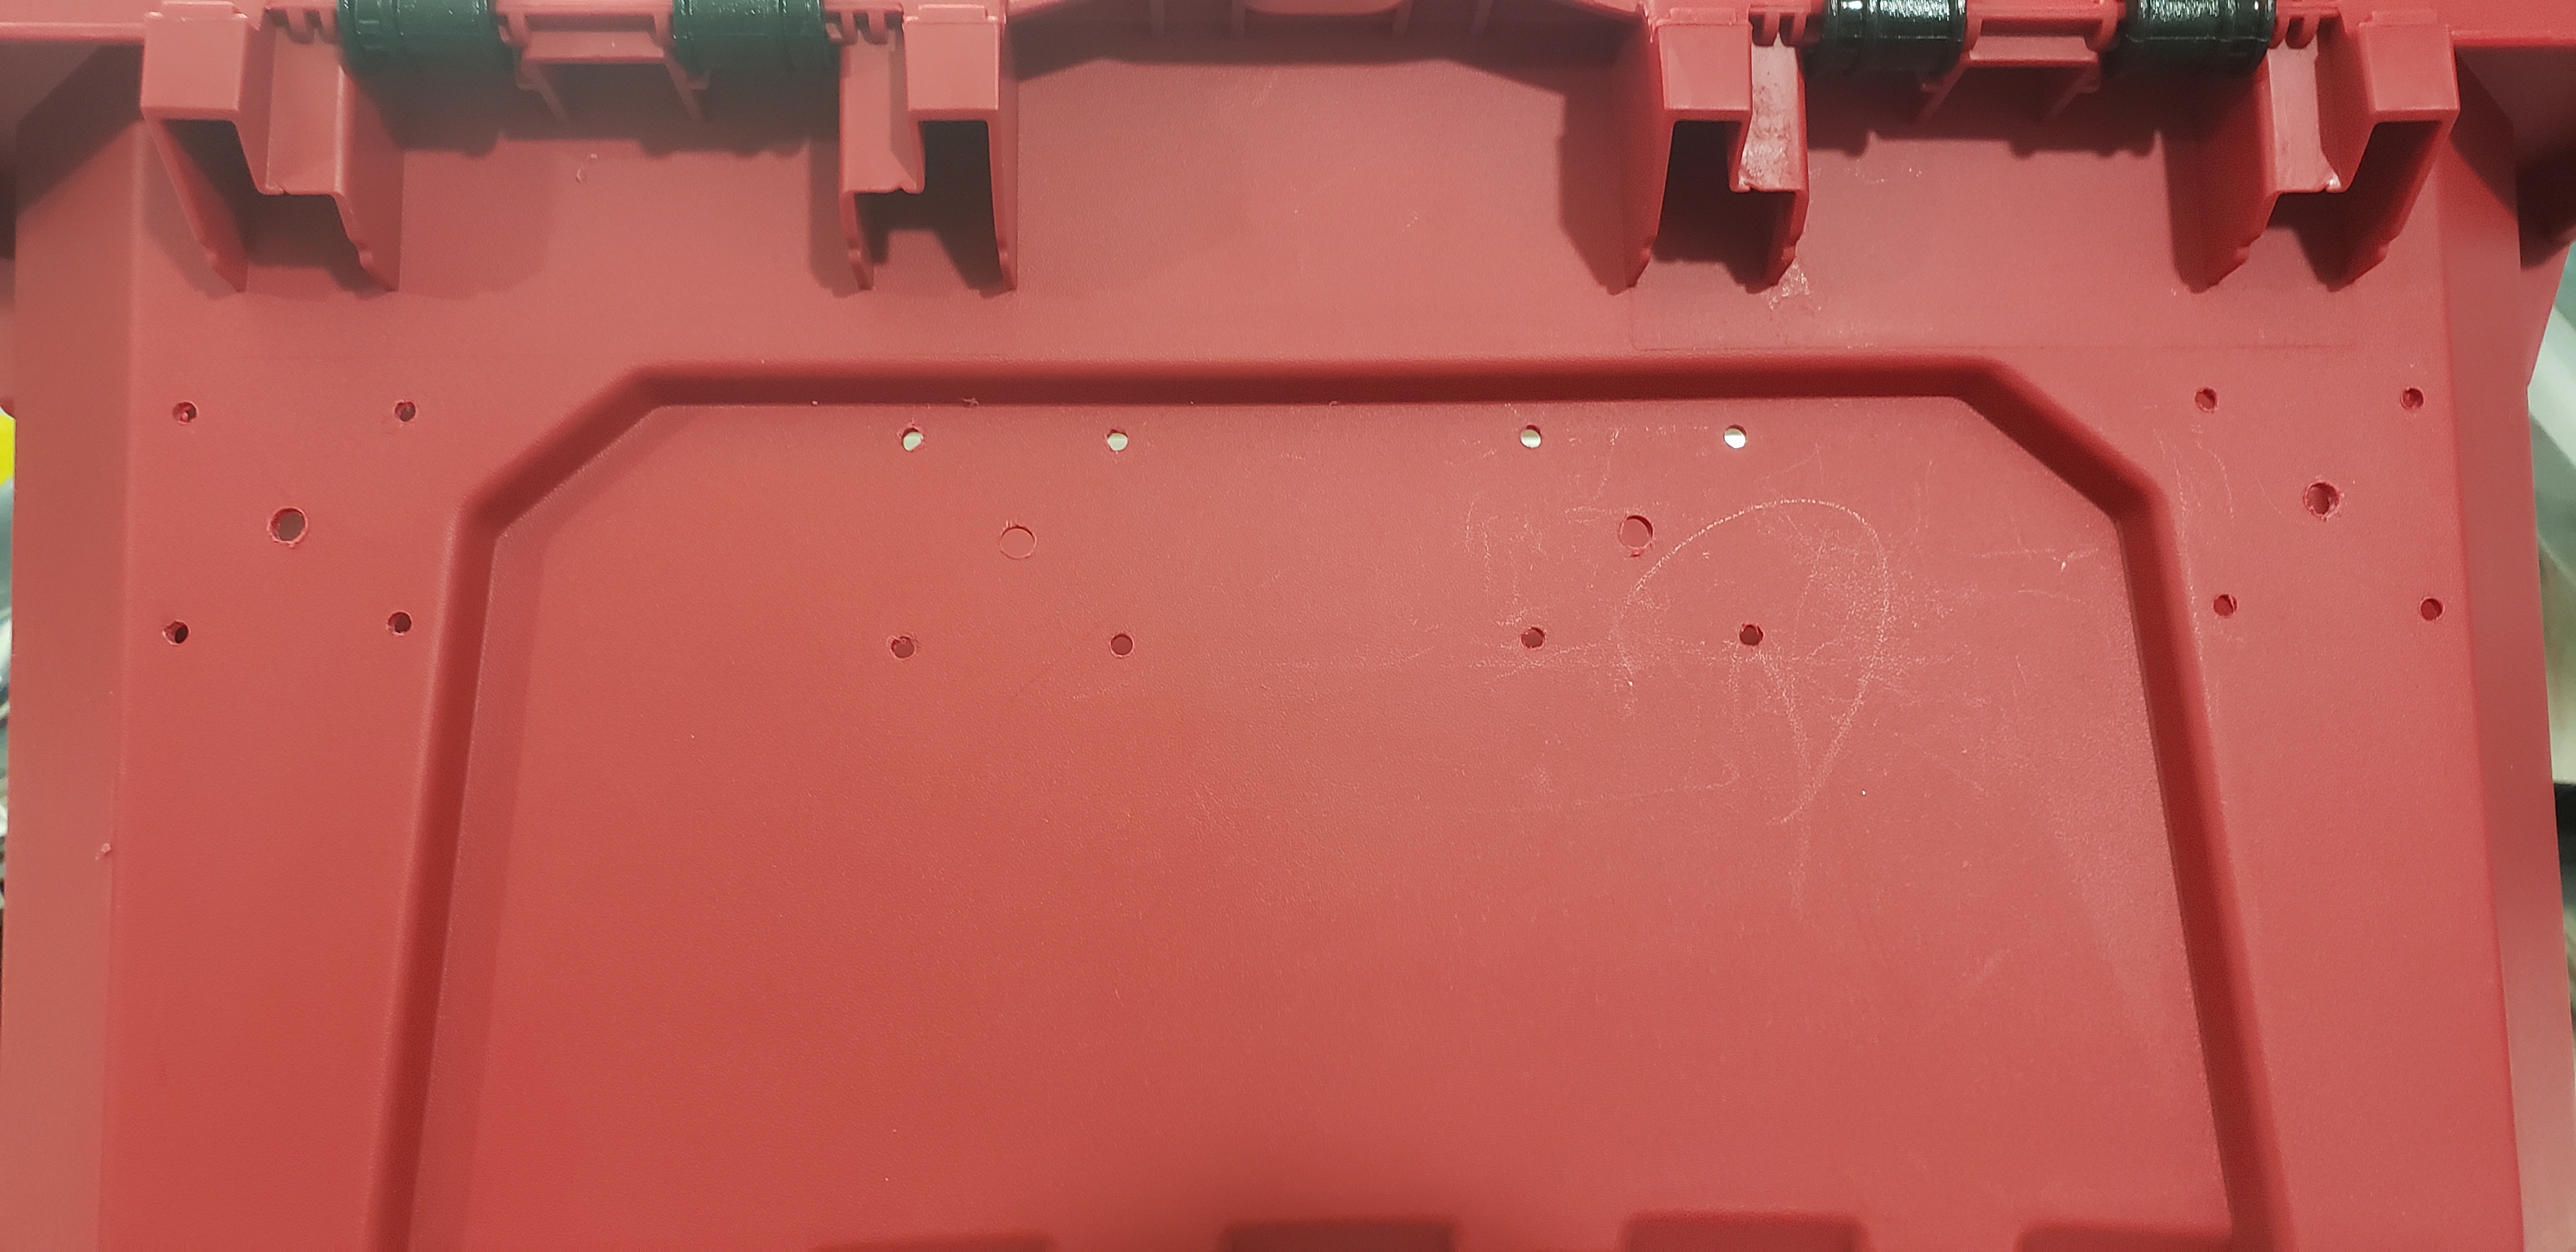 Filament port holes drilled into side of container.